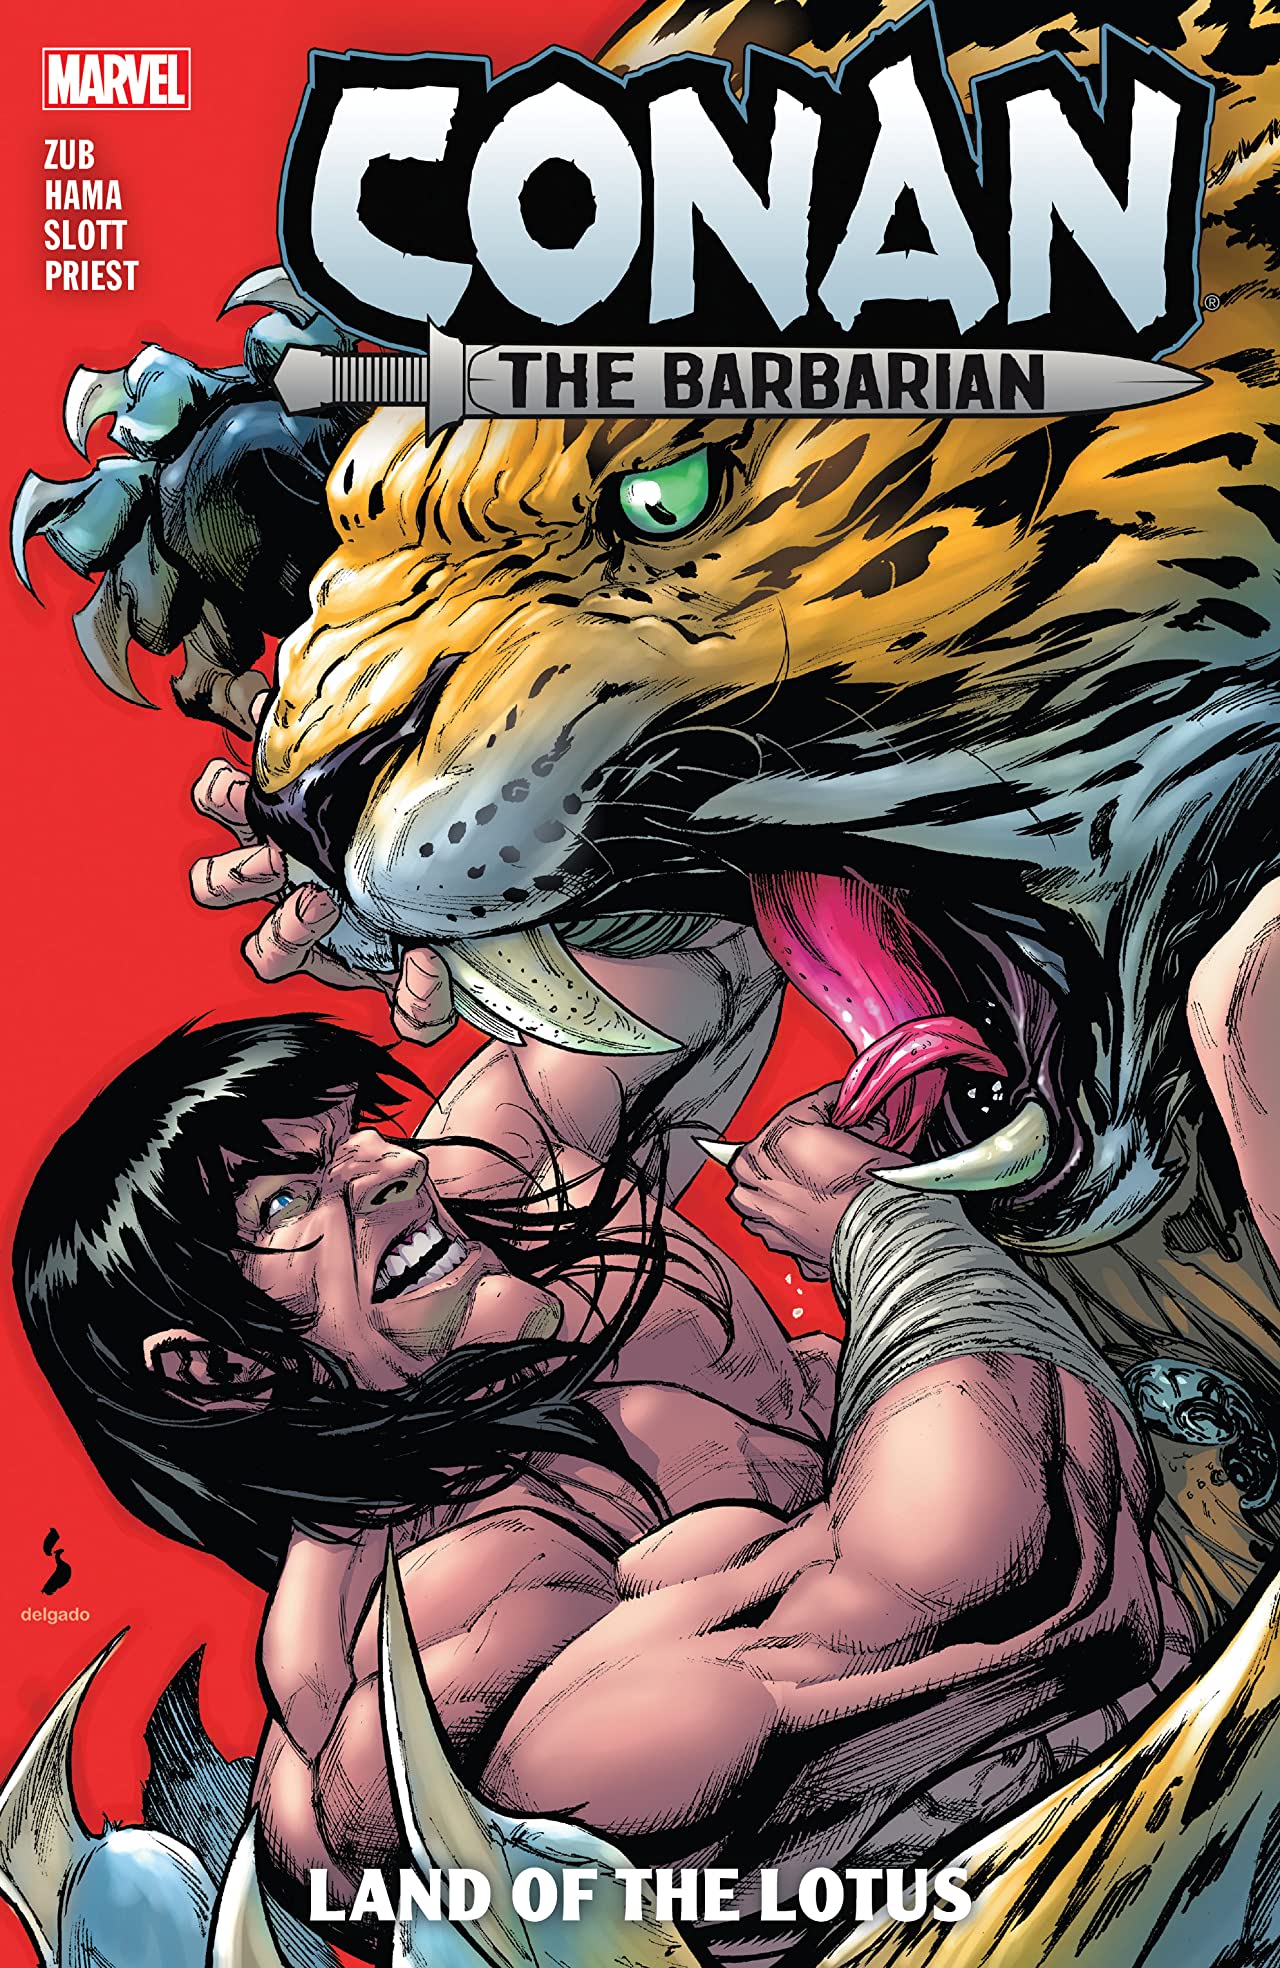 Conan The Barbarian by Jim Zub Vol. 2: Land Of The Lotus (Trade Paperback)